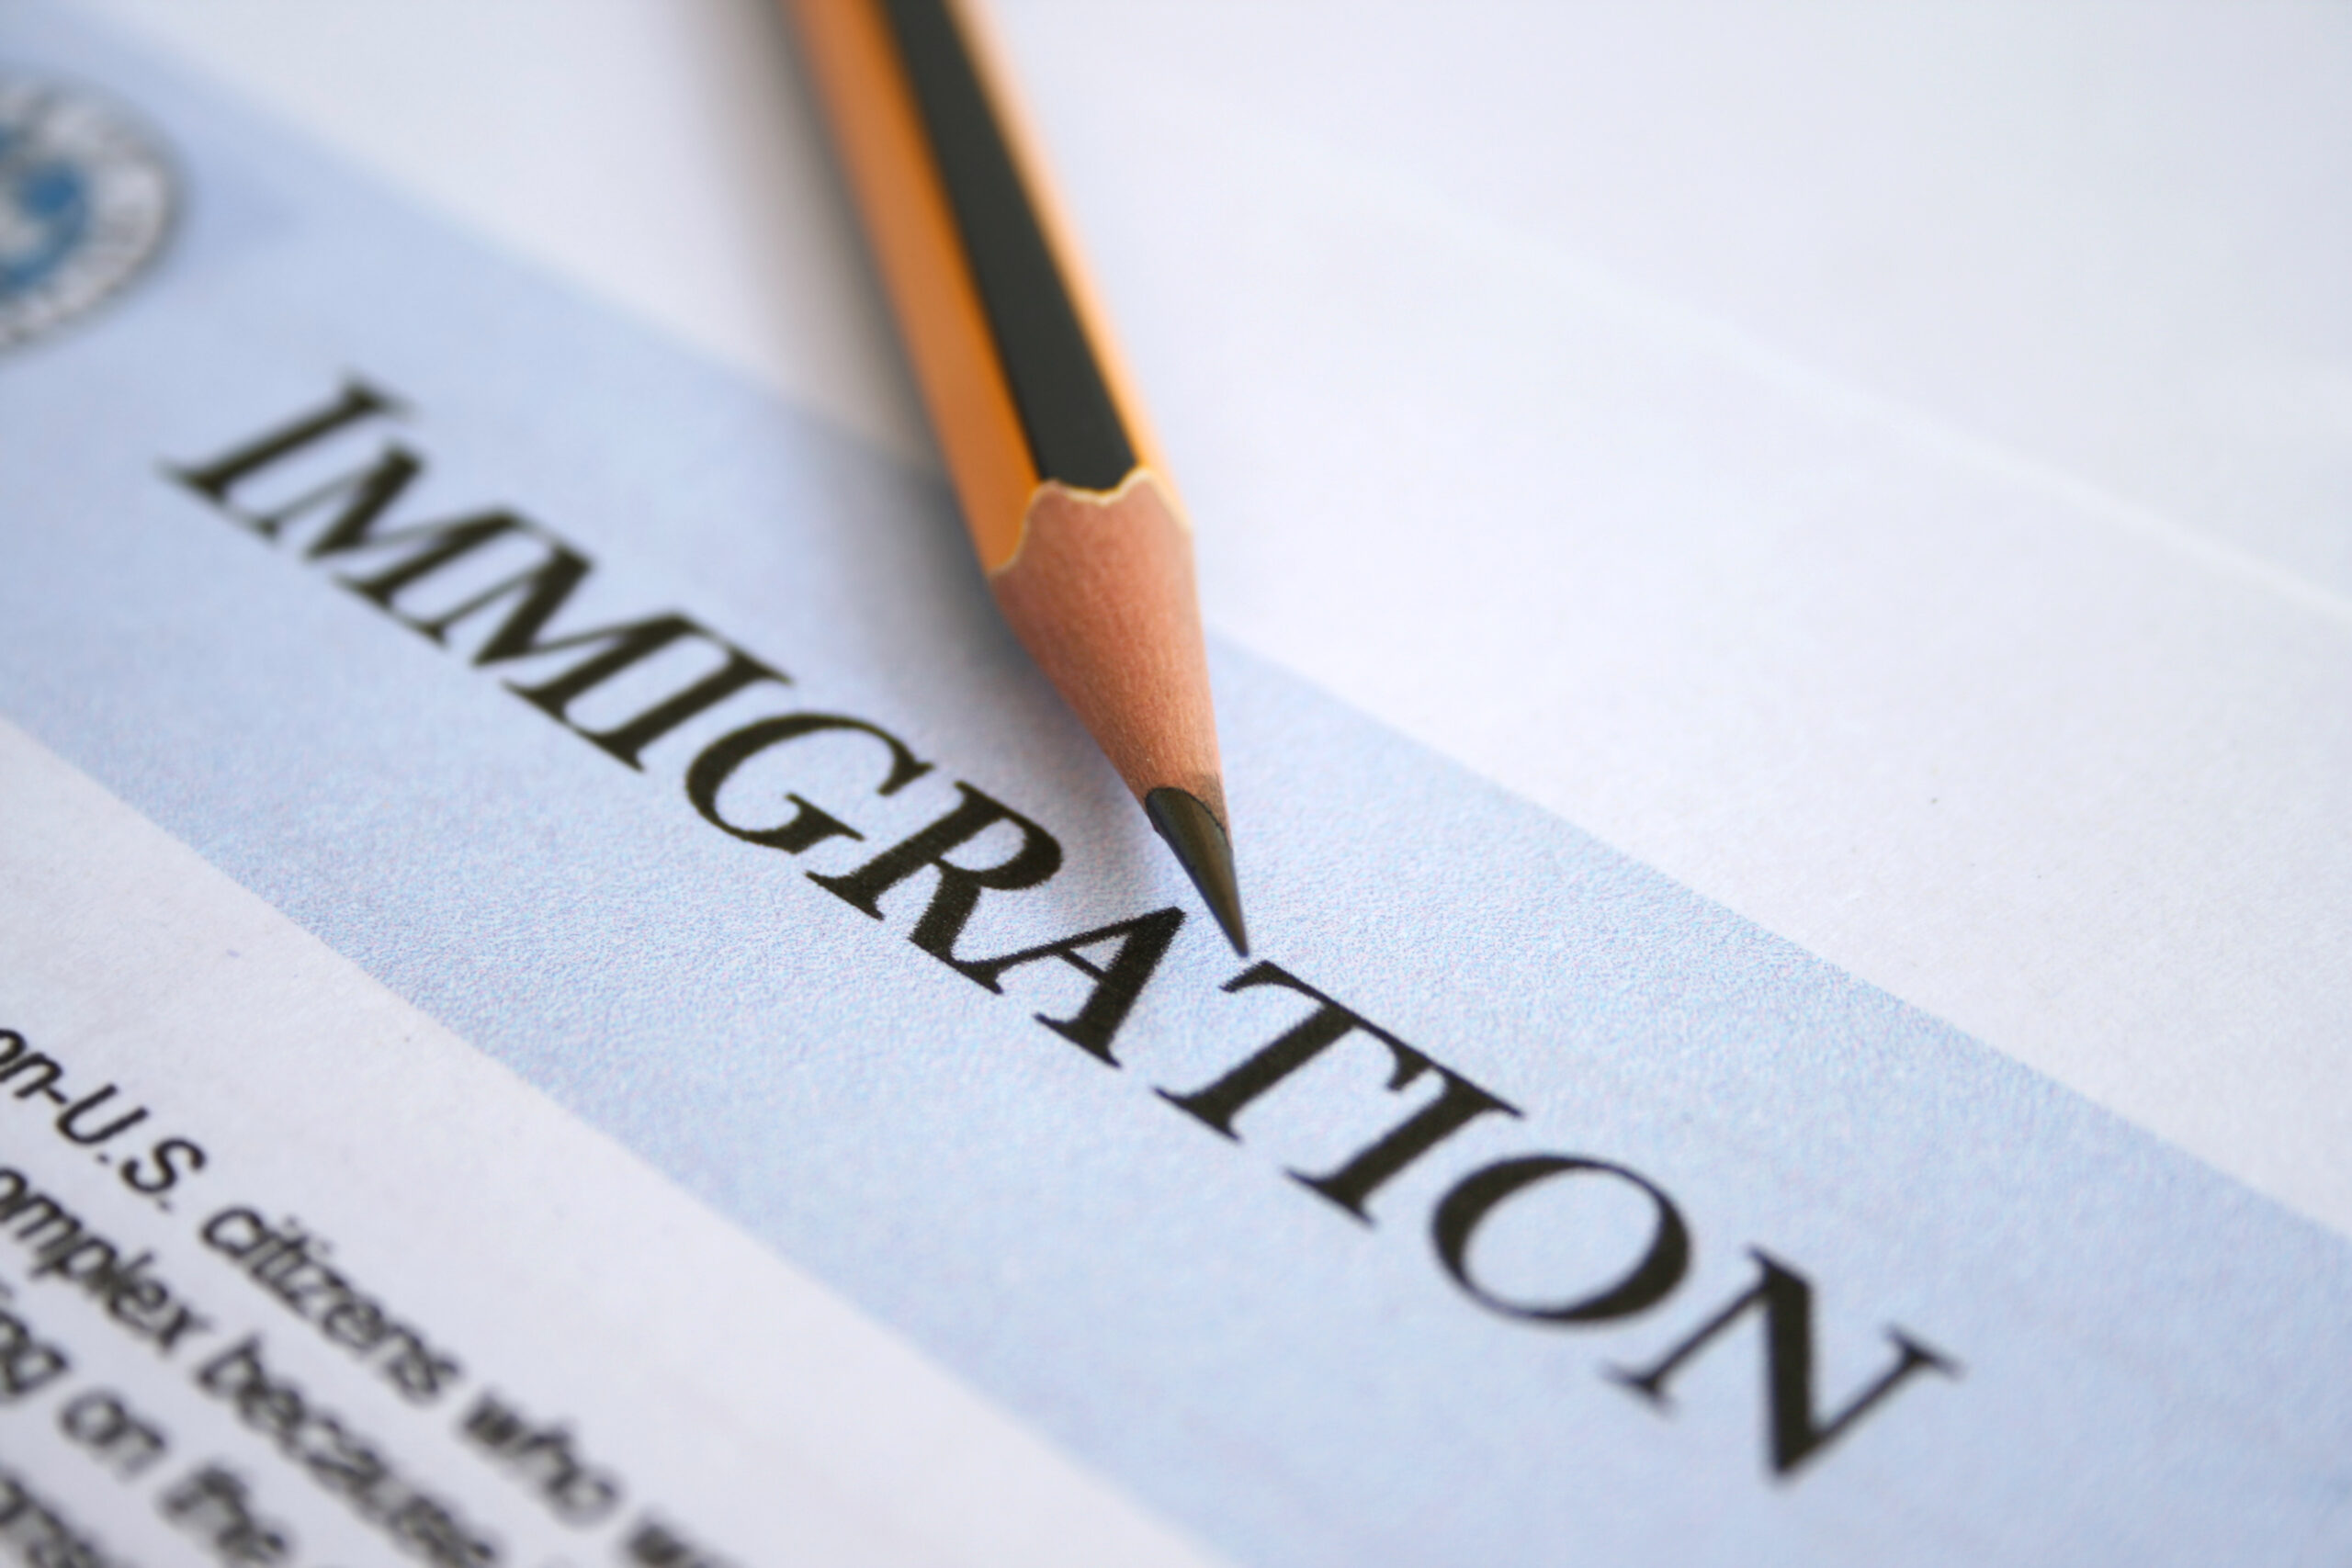 What do I do when I need help with my immigration?